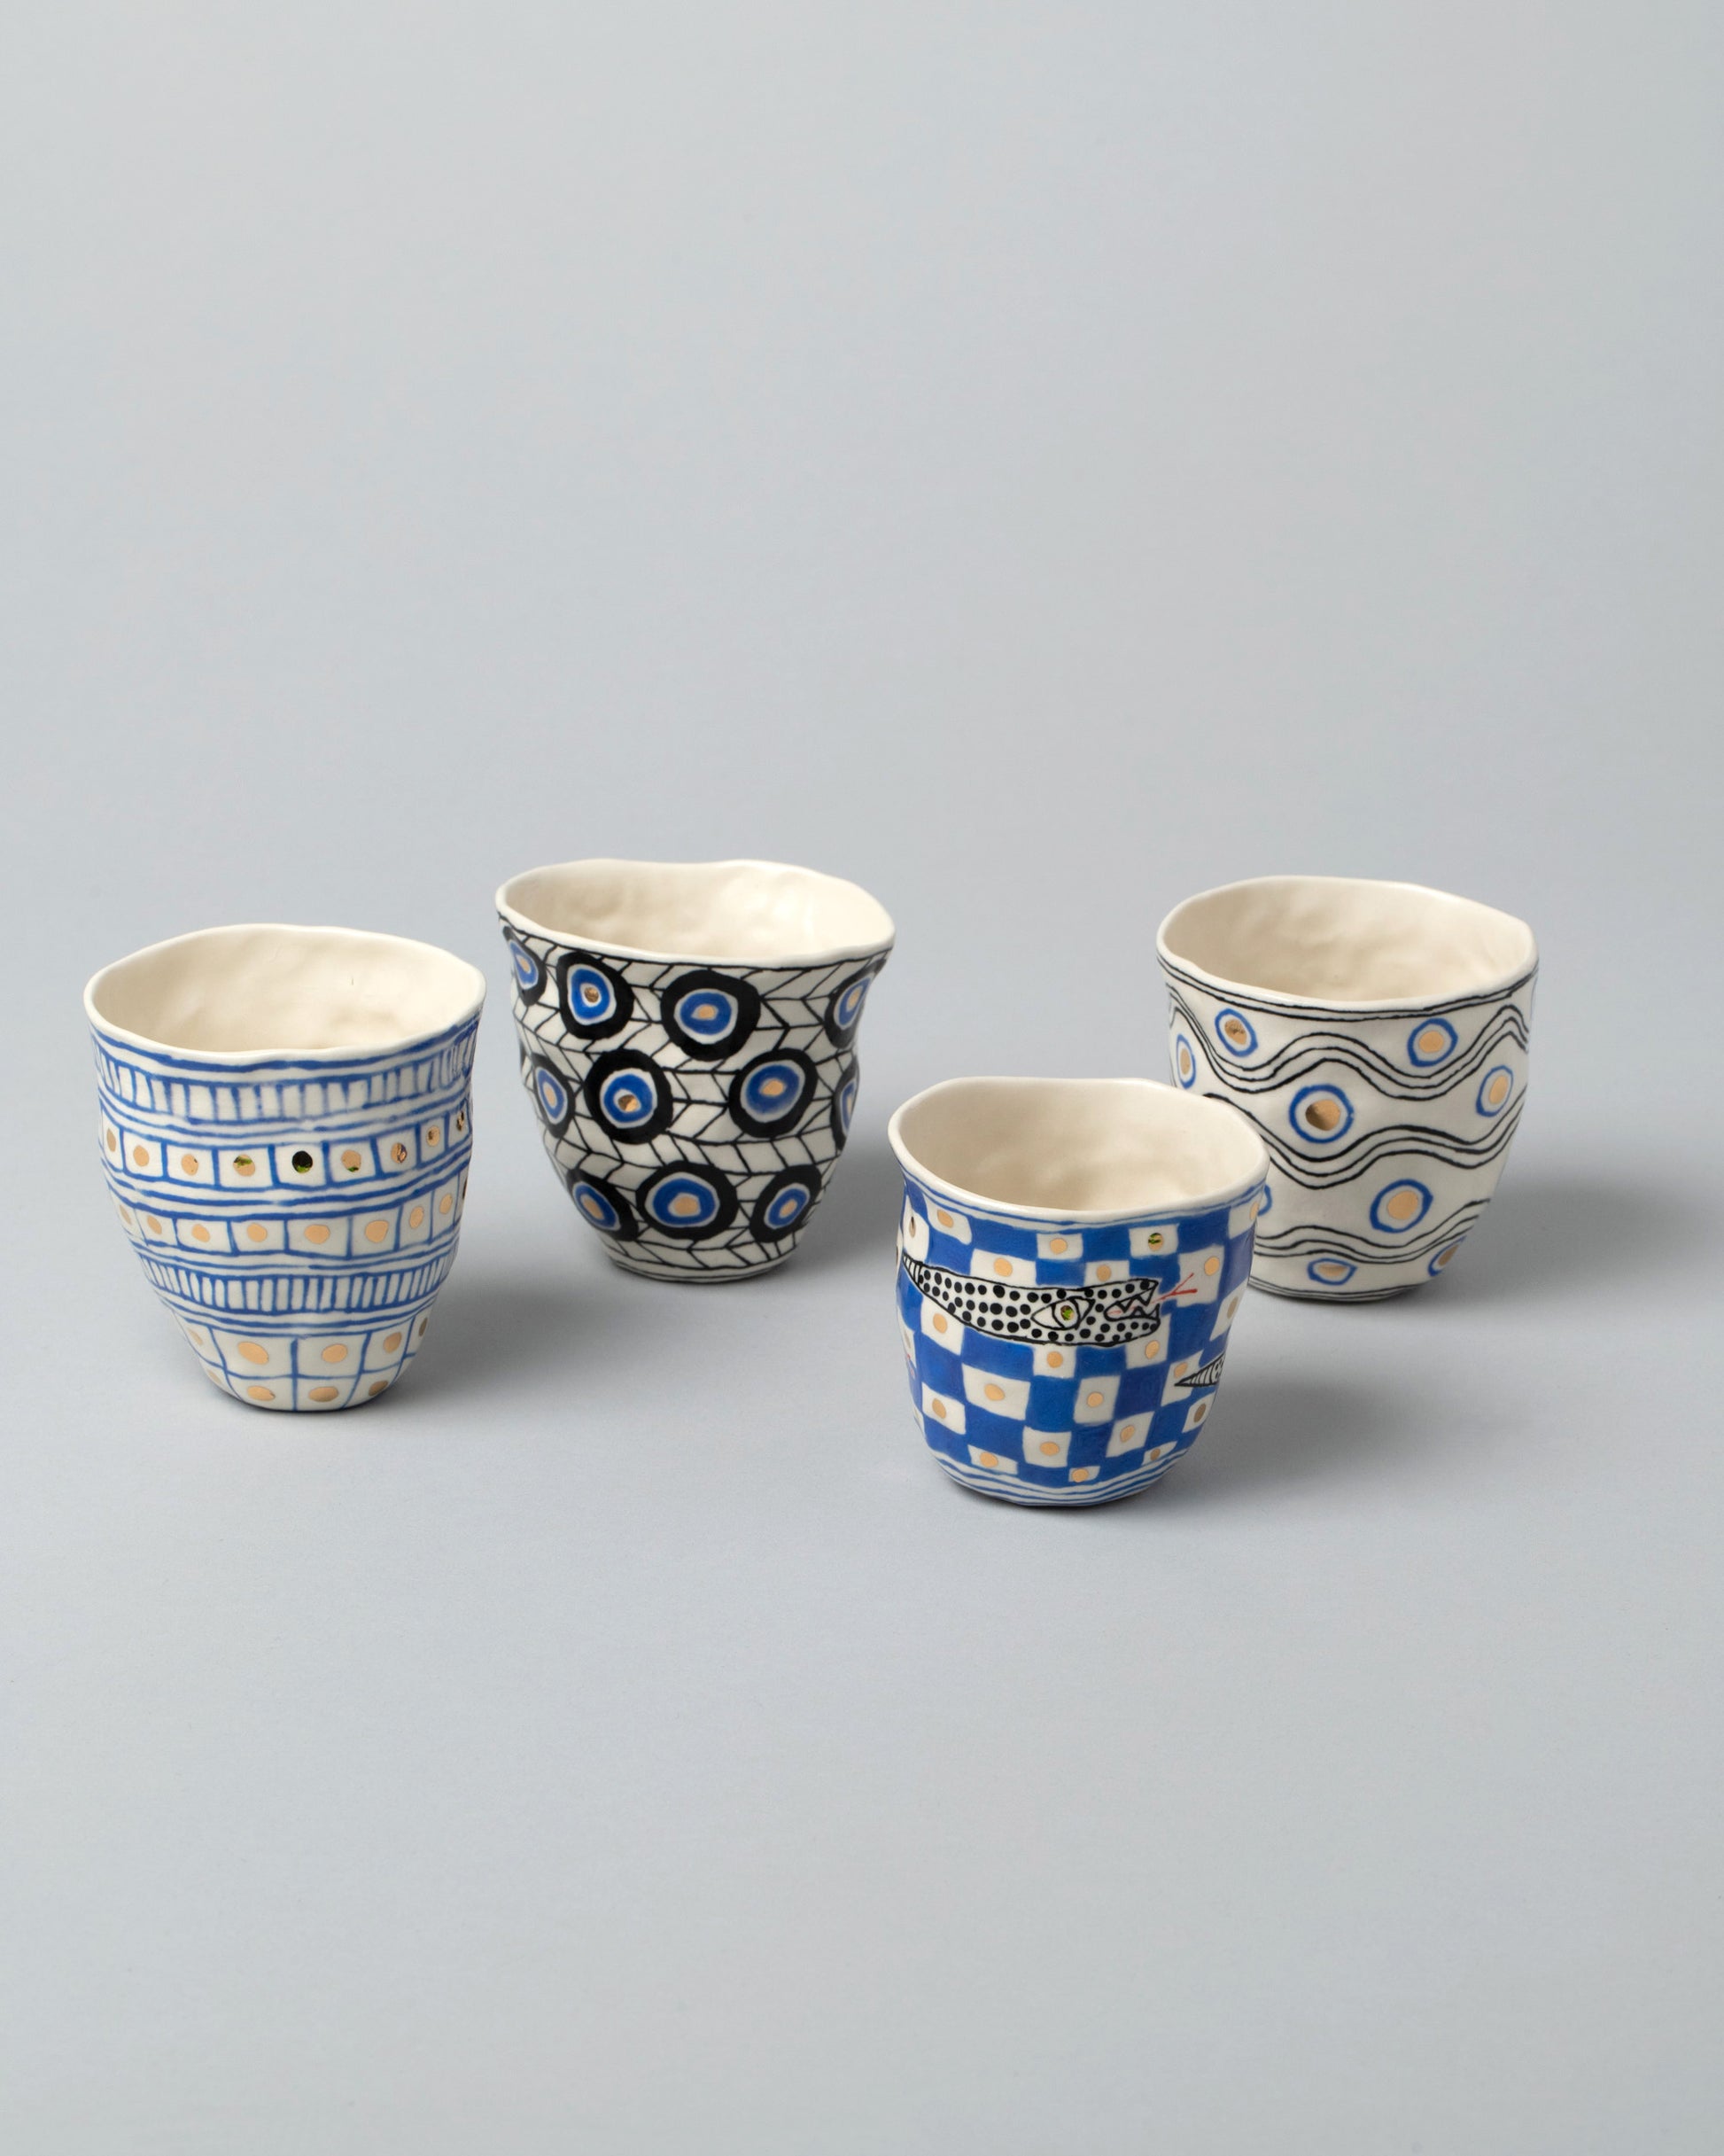 Group of Suzanne Sullivan Azul Tumblers on light color background.